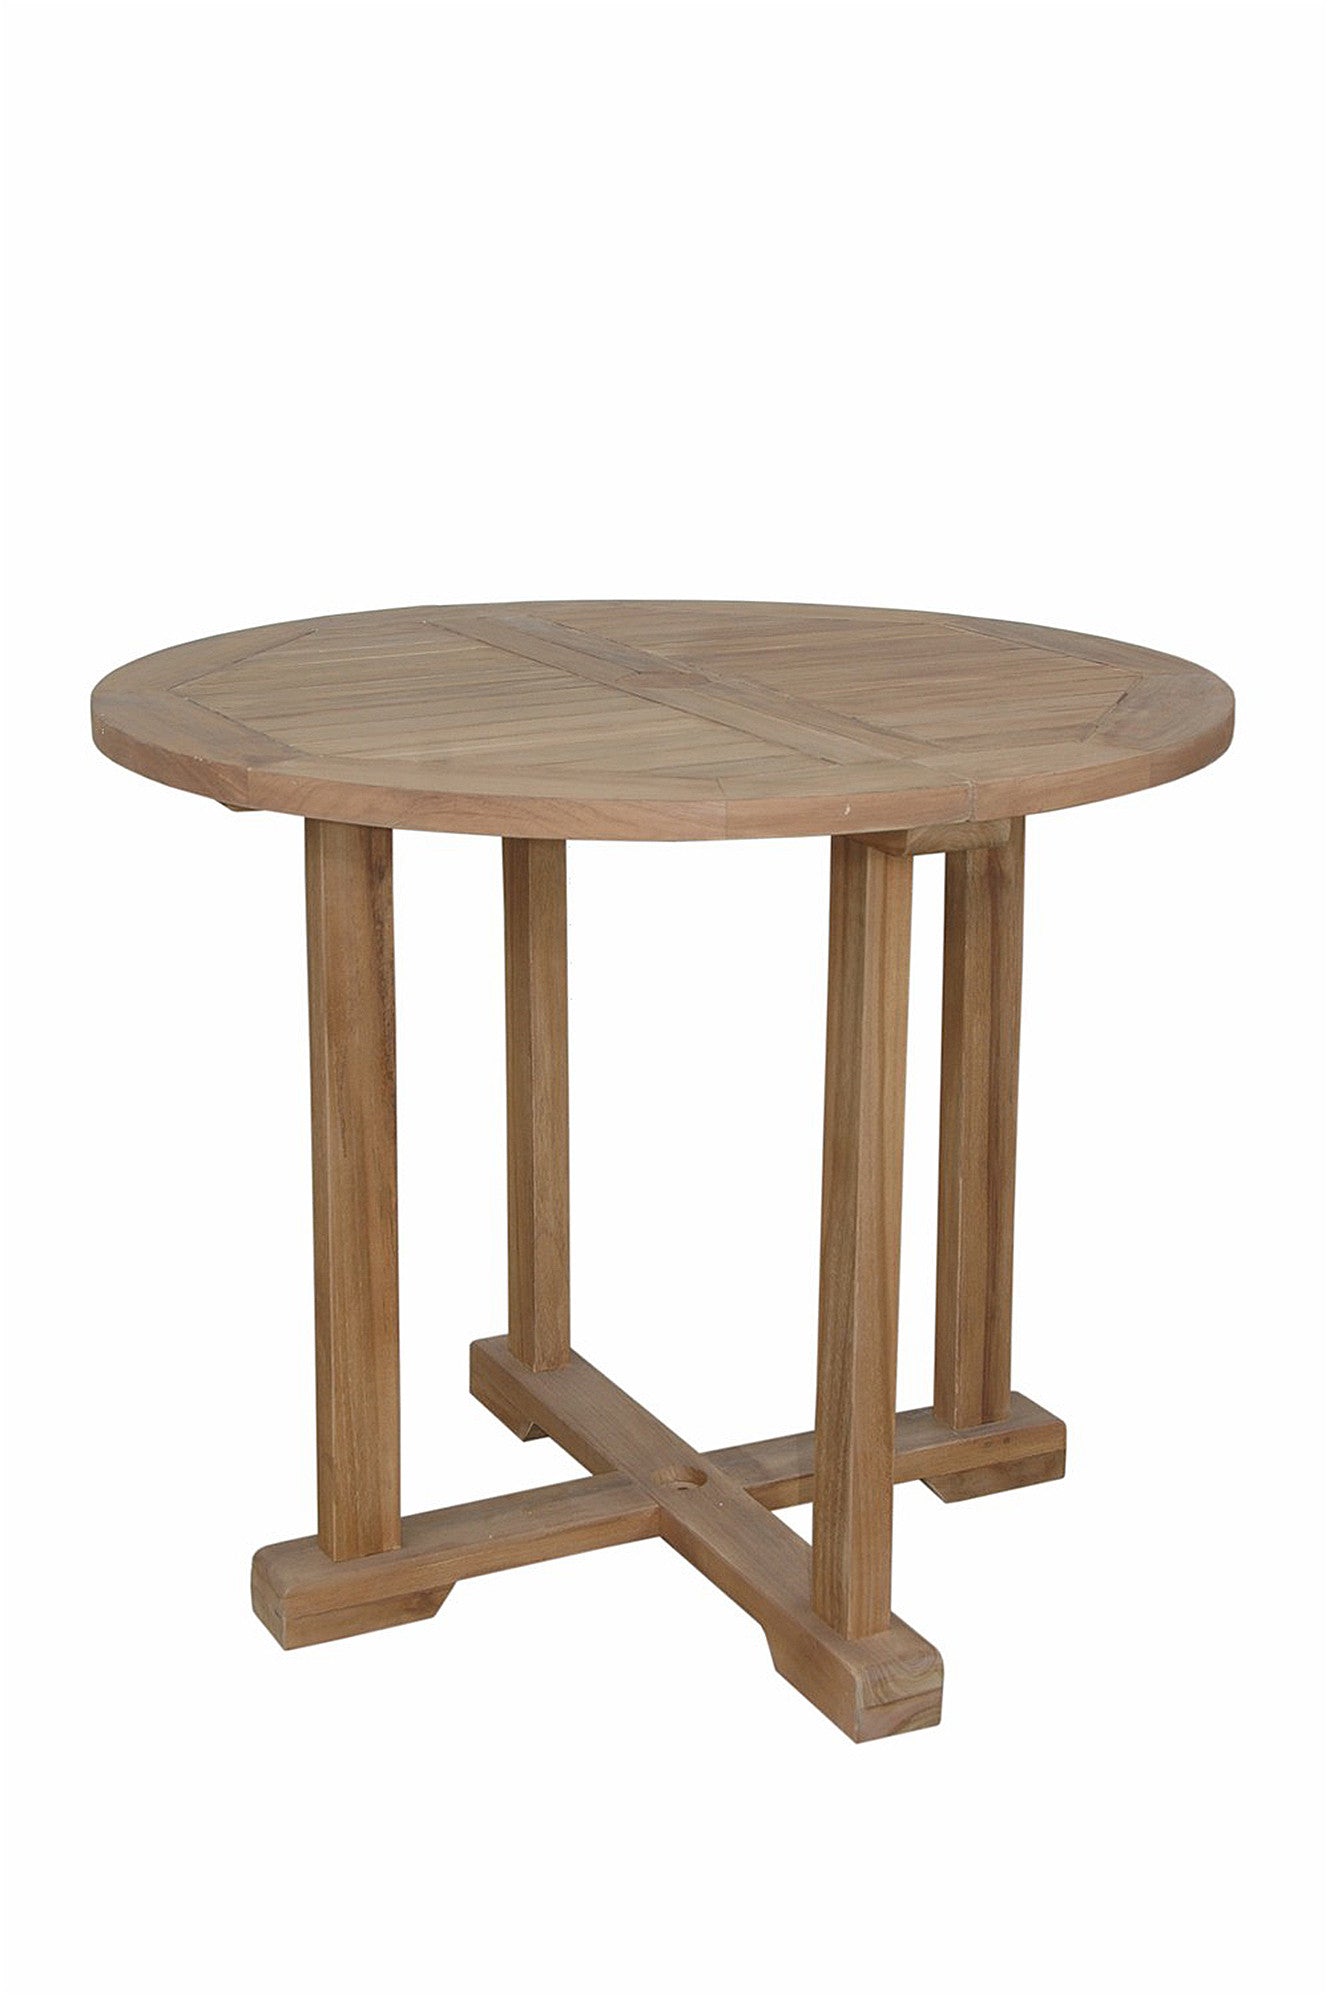 Montage 35 Bistro Round Table By Anderson Teak Teakwood Central